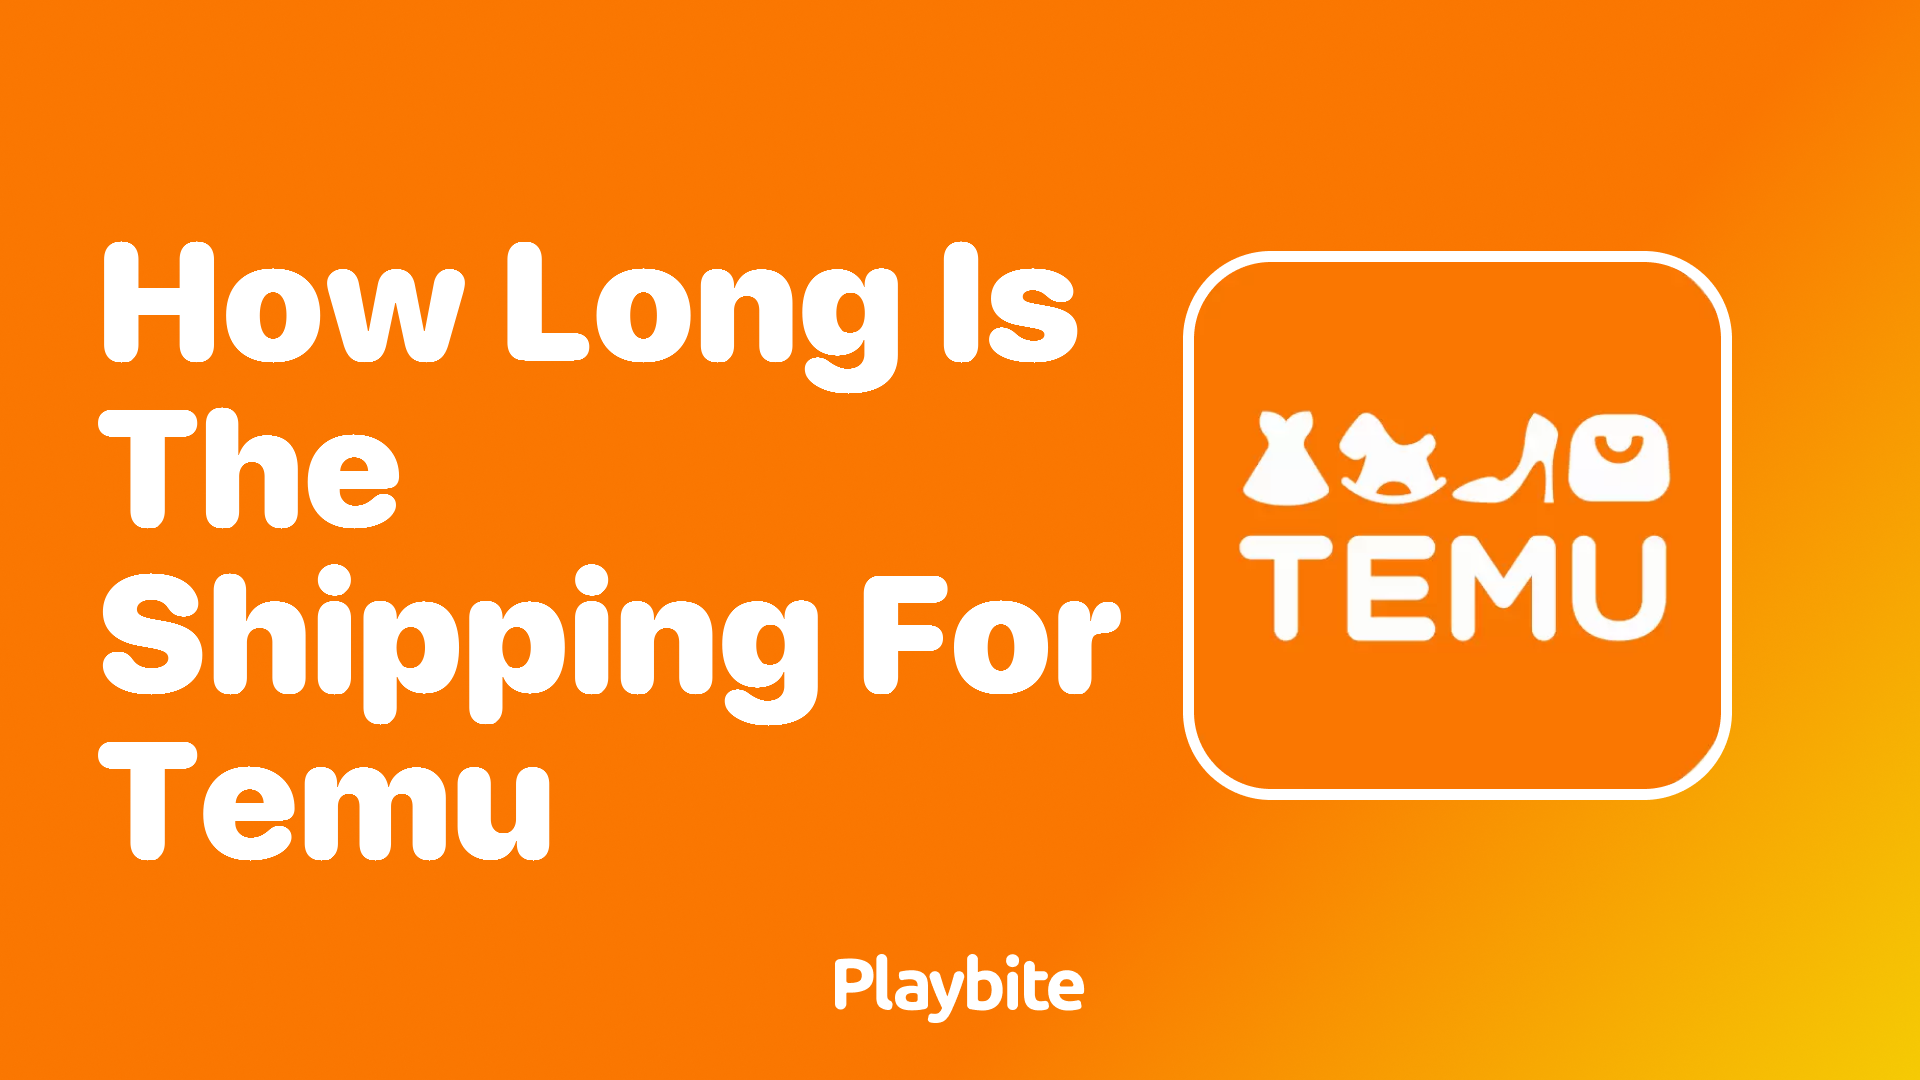 Does Temu Offer Expedited Shipping Options? - Playbite